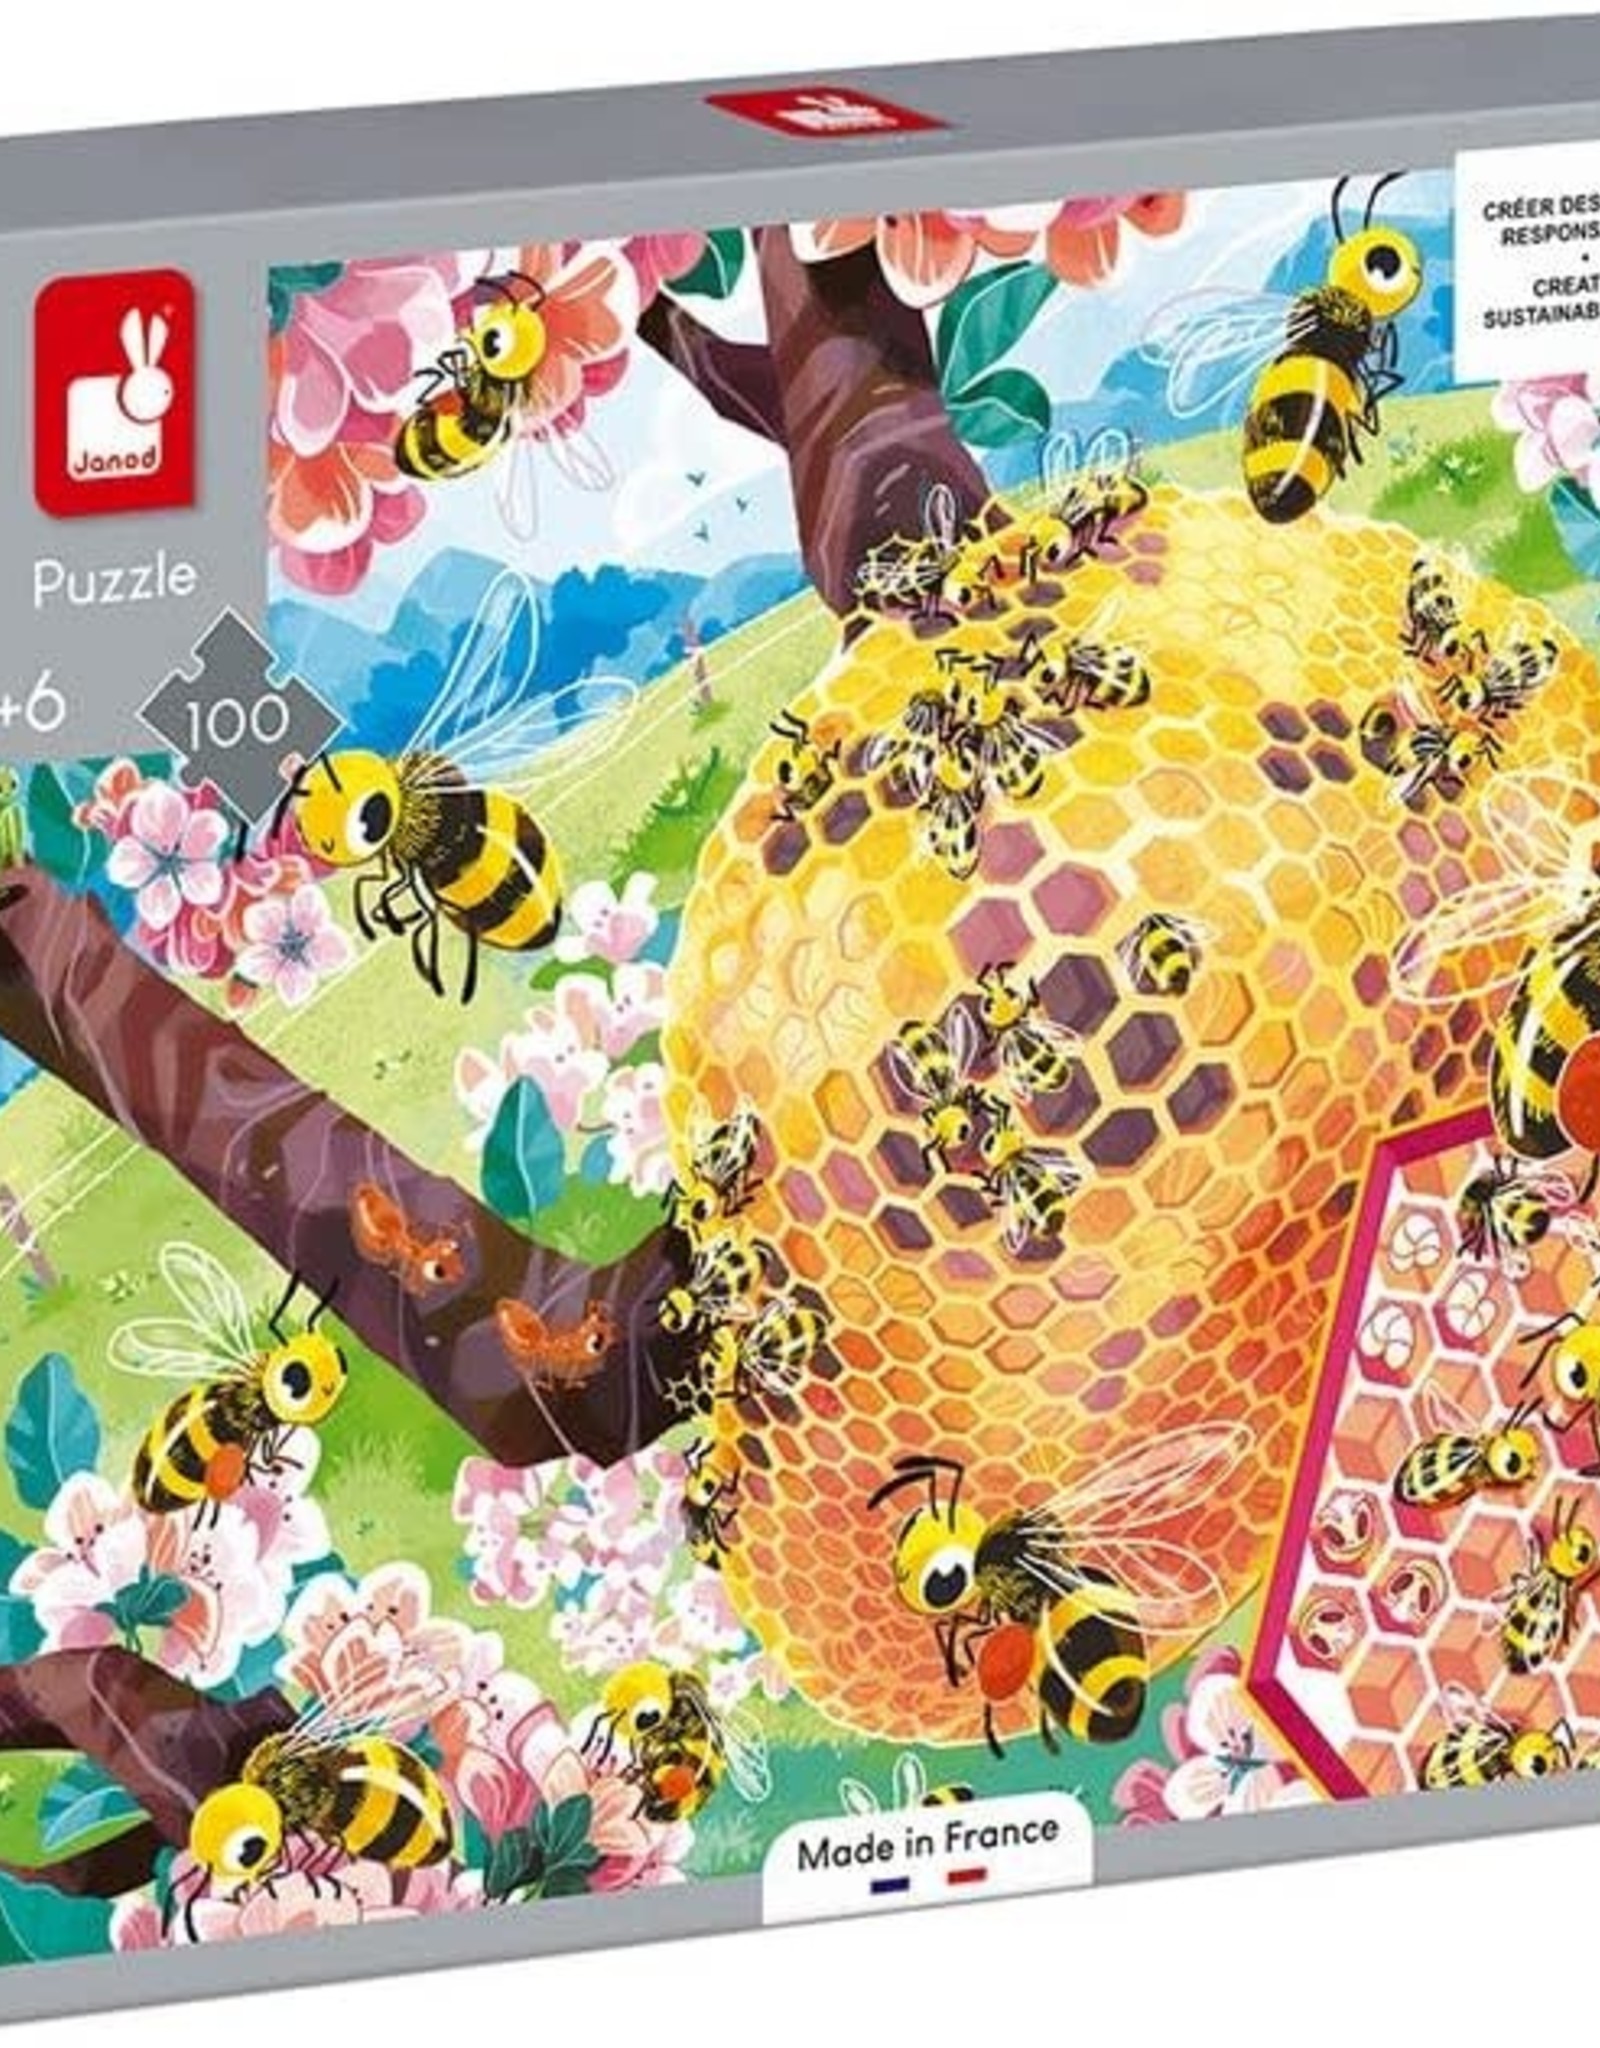 Janod 100pc Puzzle - Bee Life